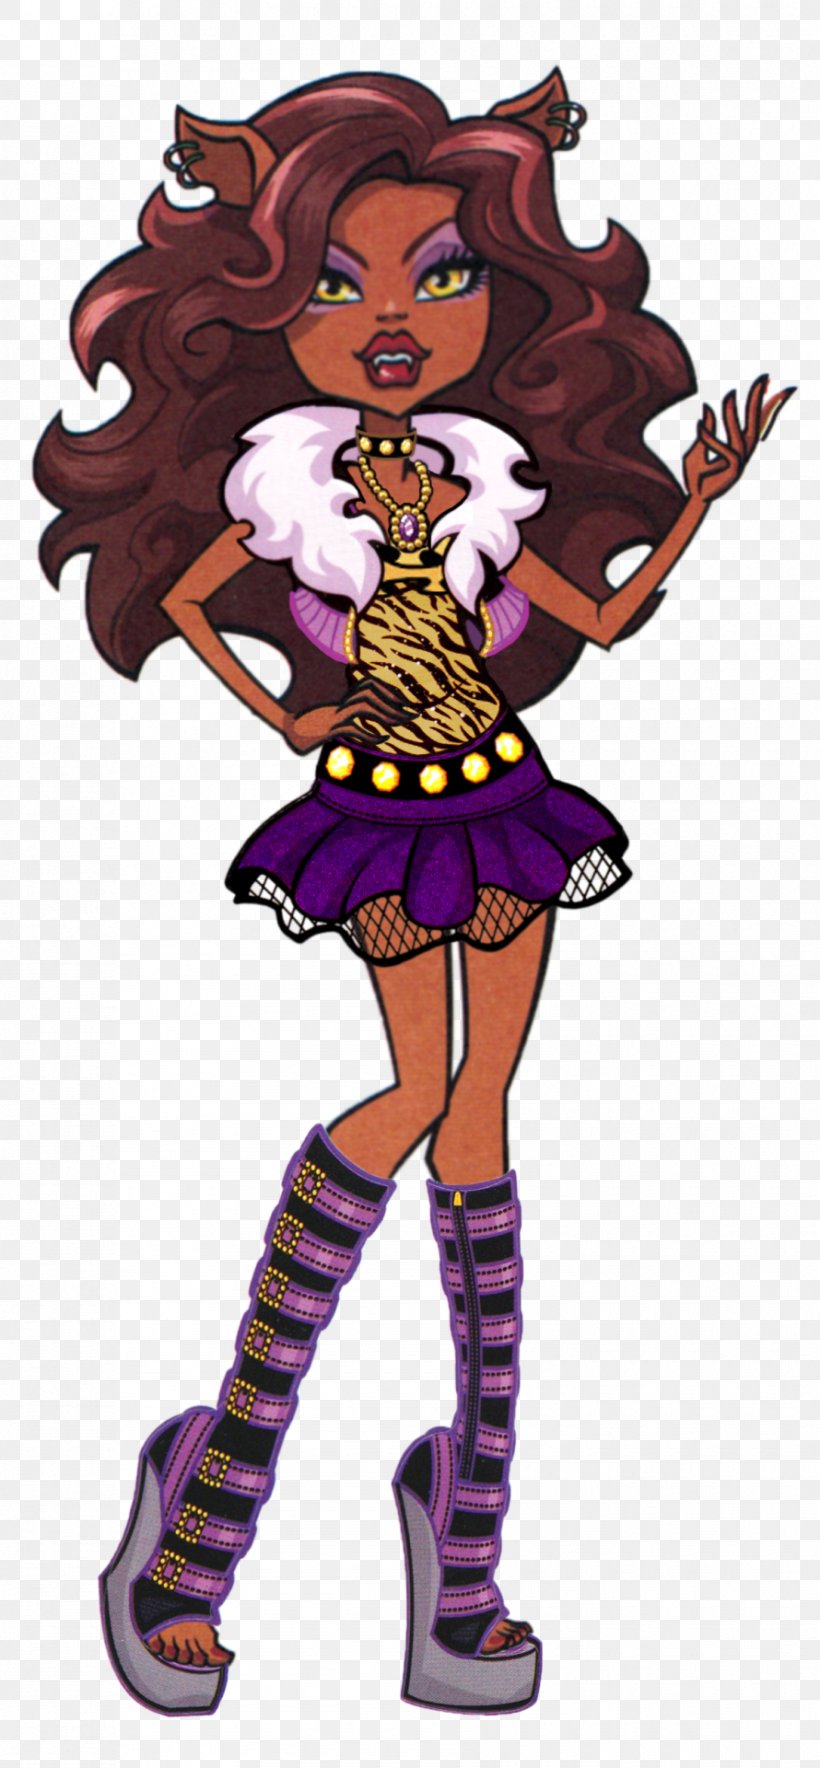 Monster High Doll Toy Clip Art, PNG, 890x1920px, Monster High, Art, Child, Clothing, Costume Design Download Free